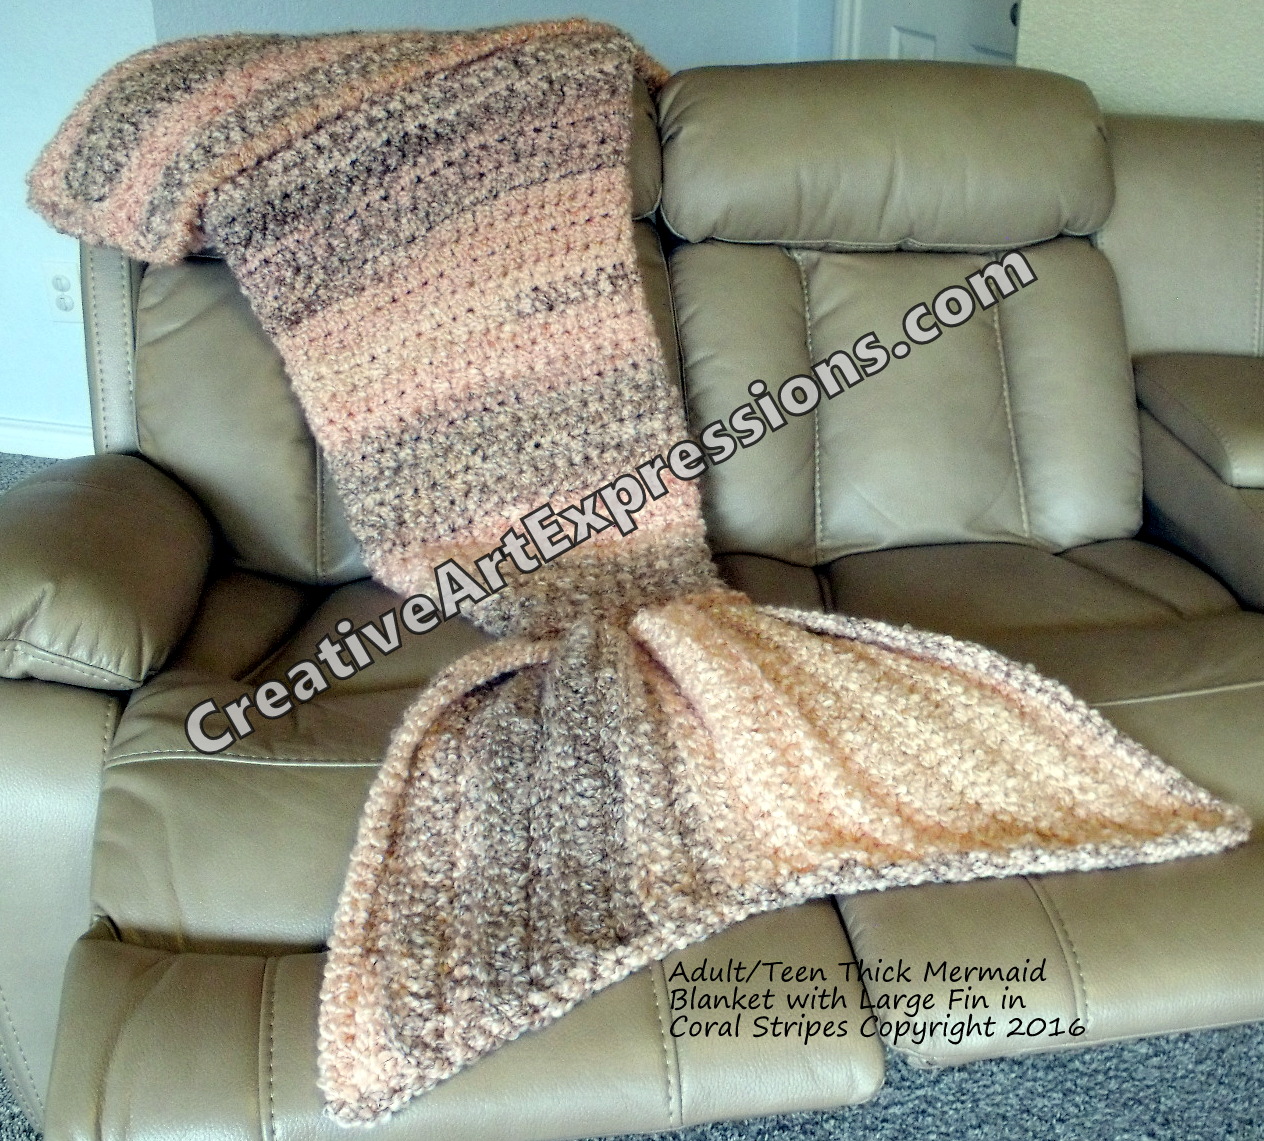 Thick Mermaid Blanket Adult/Teen Large Fin in Coral Stripes